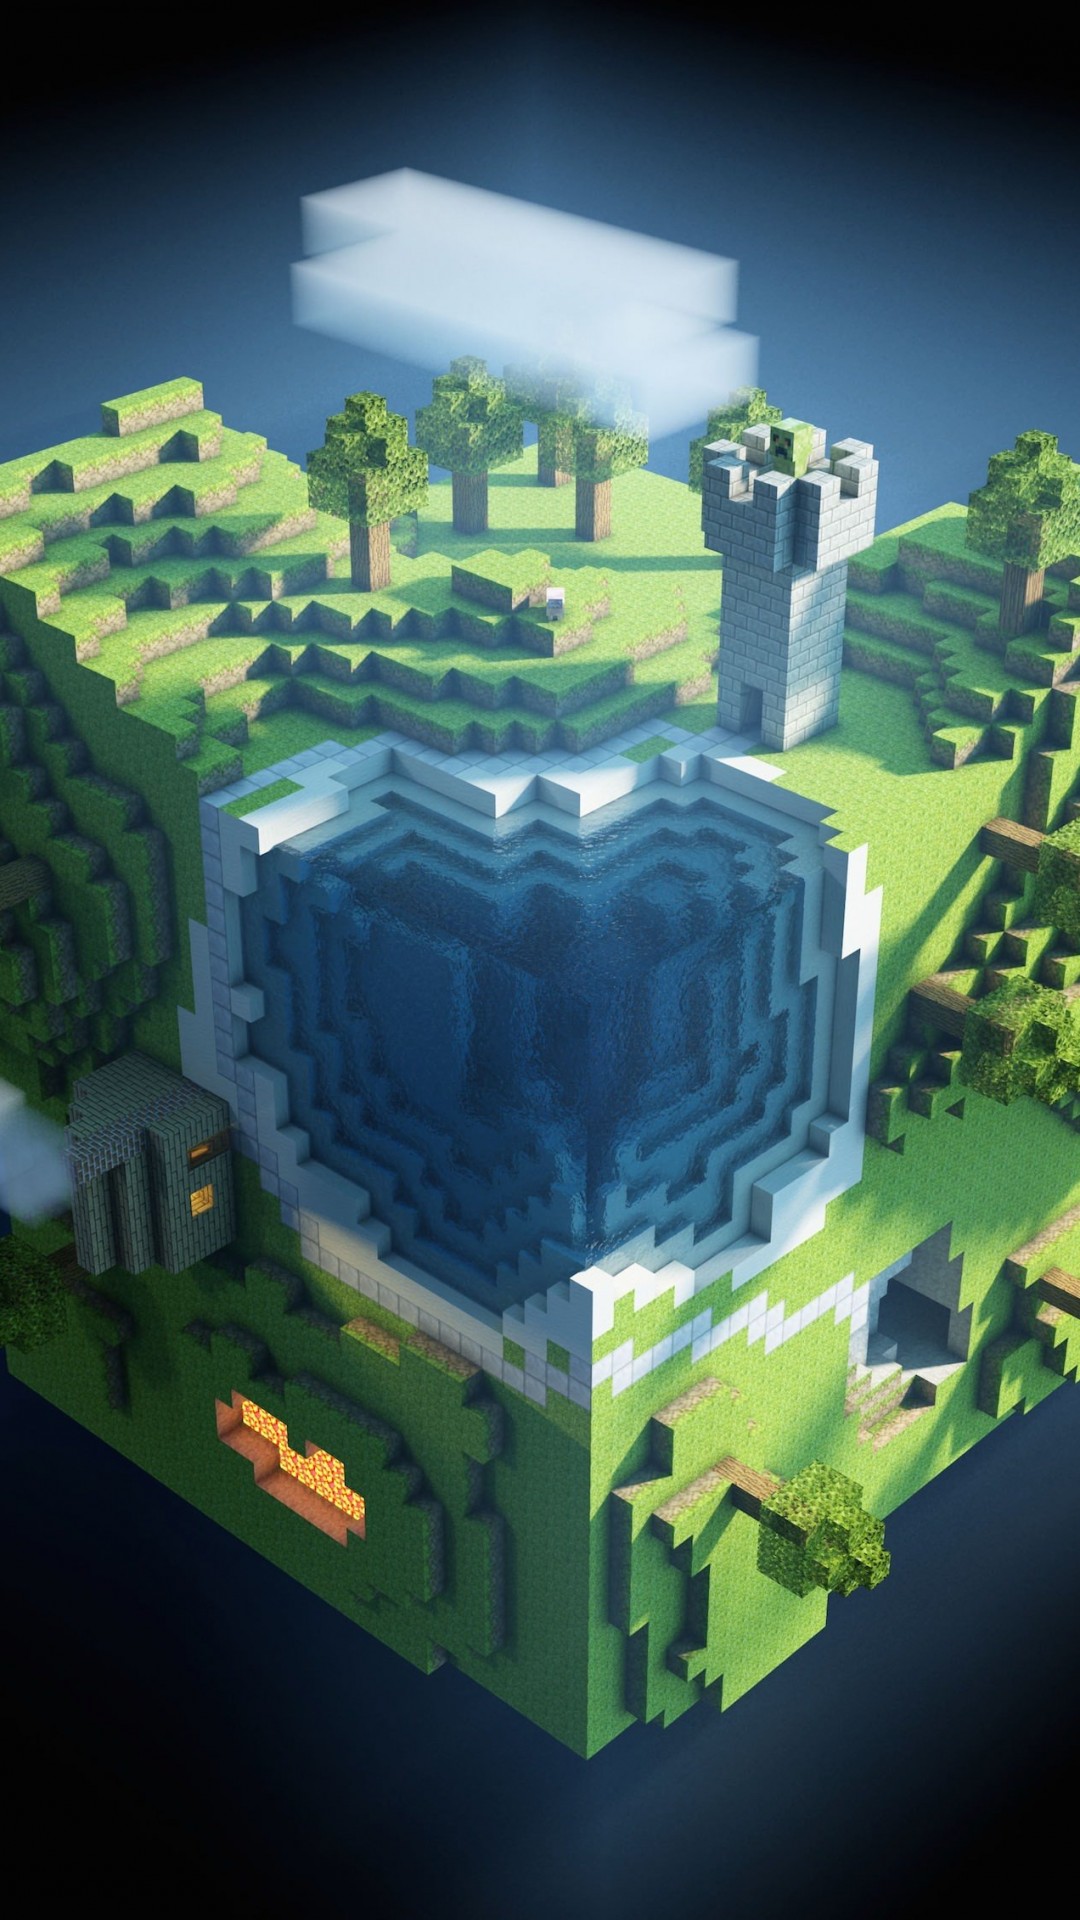 Planet Minecraft Wallpaper for SONY Xperia Z3